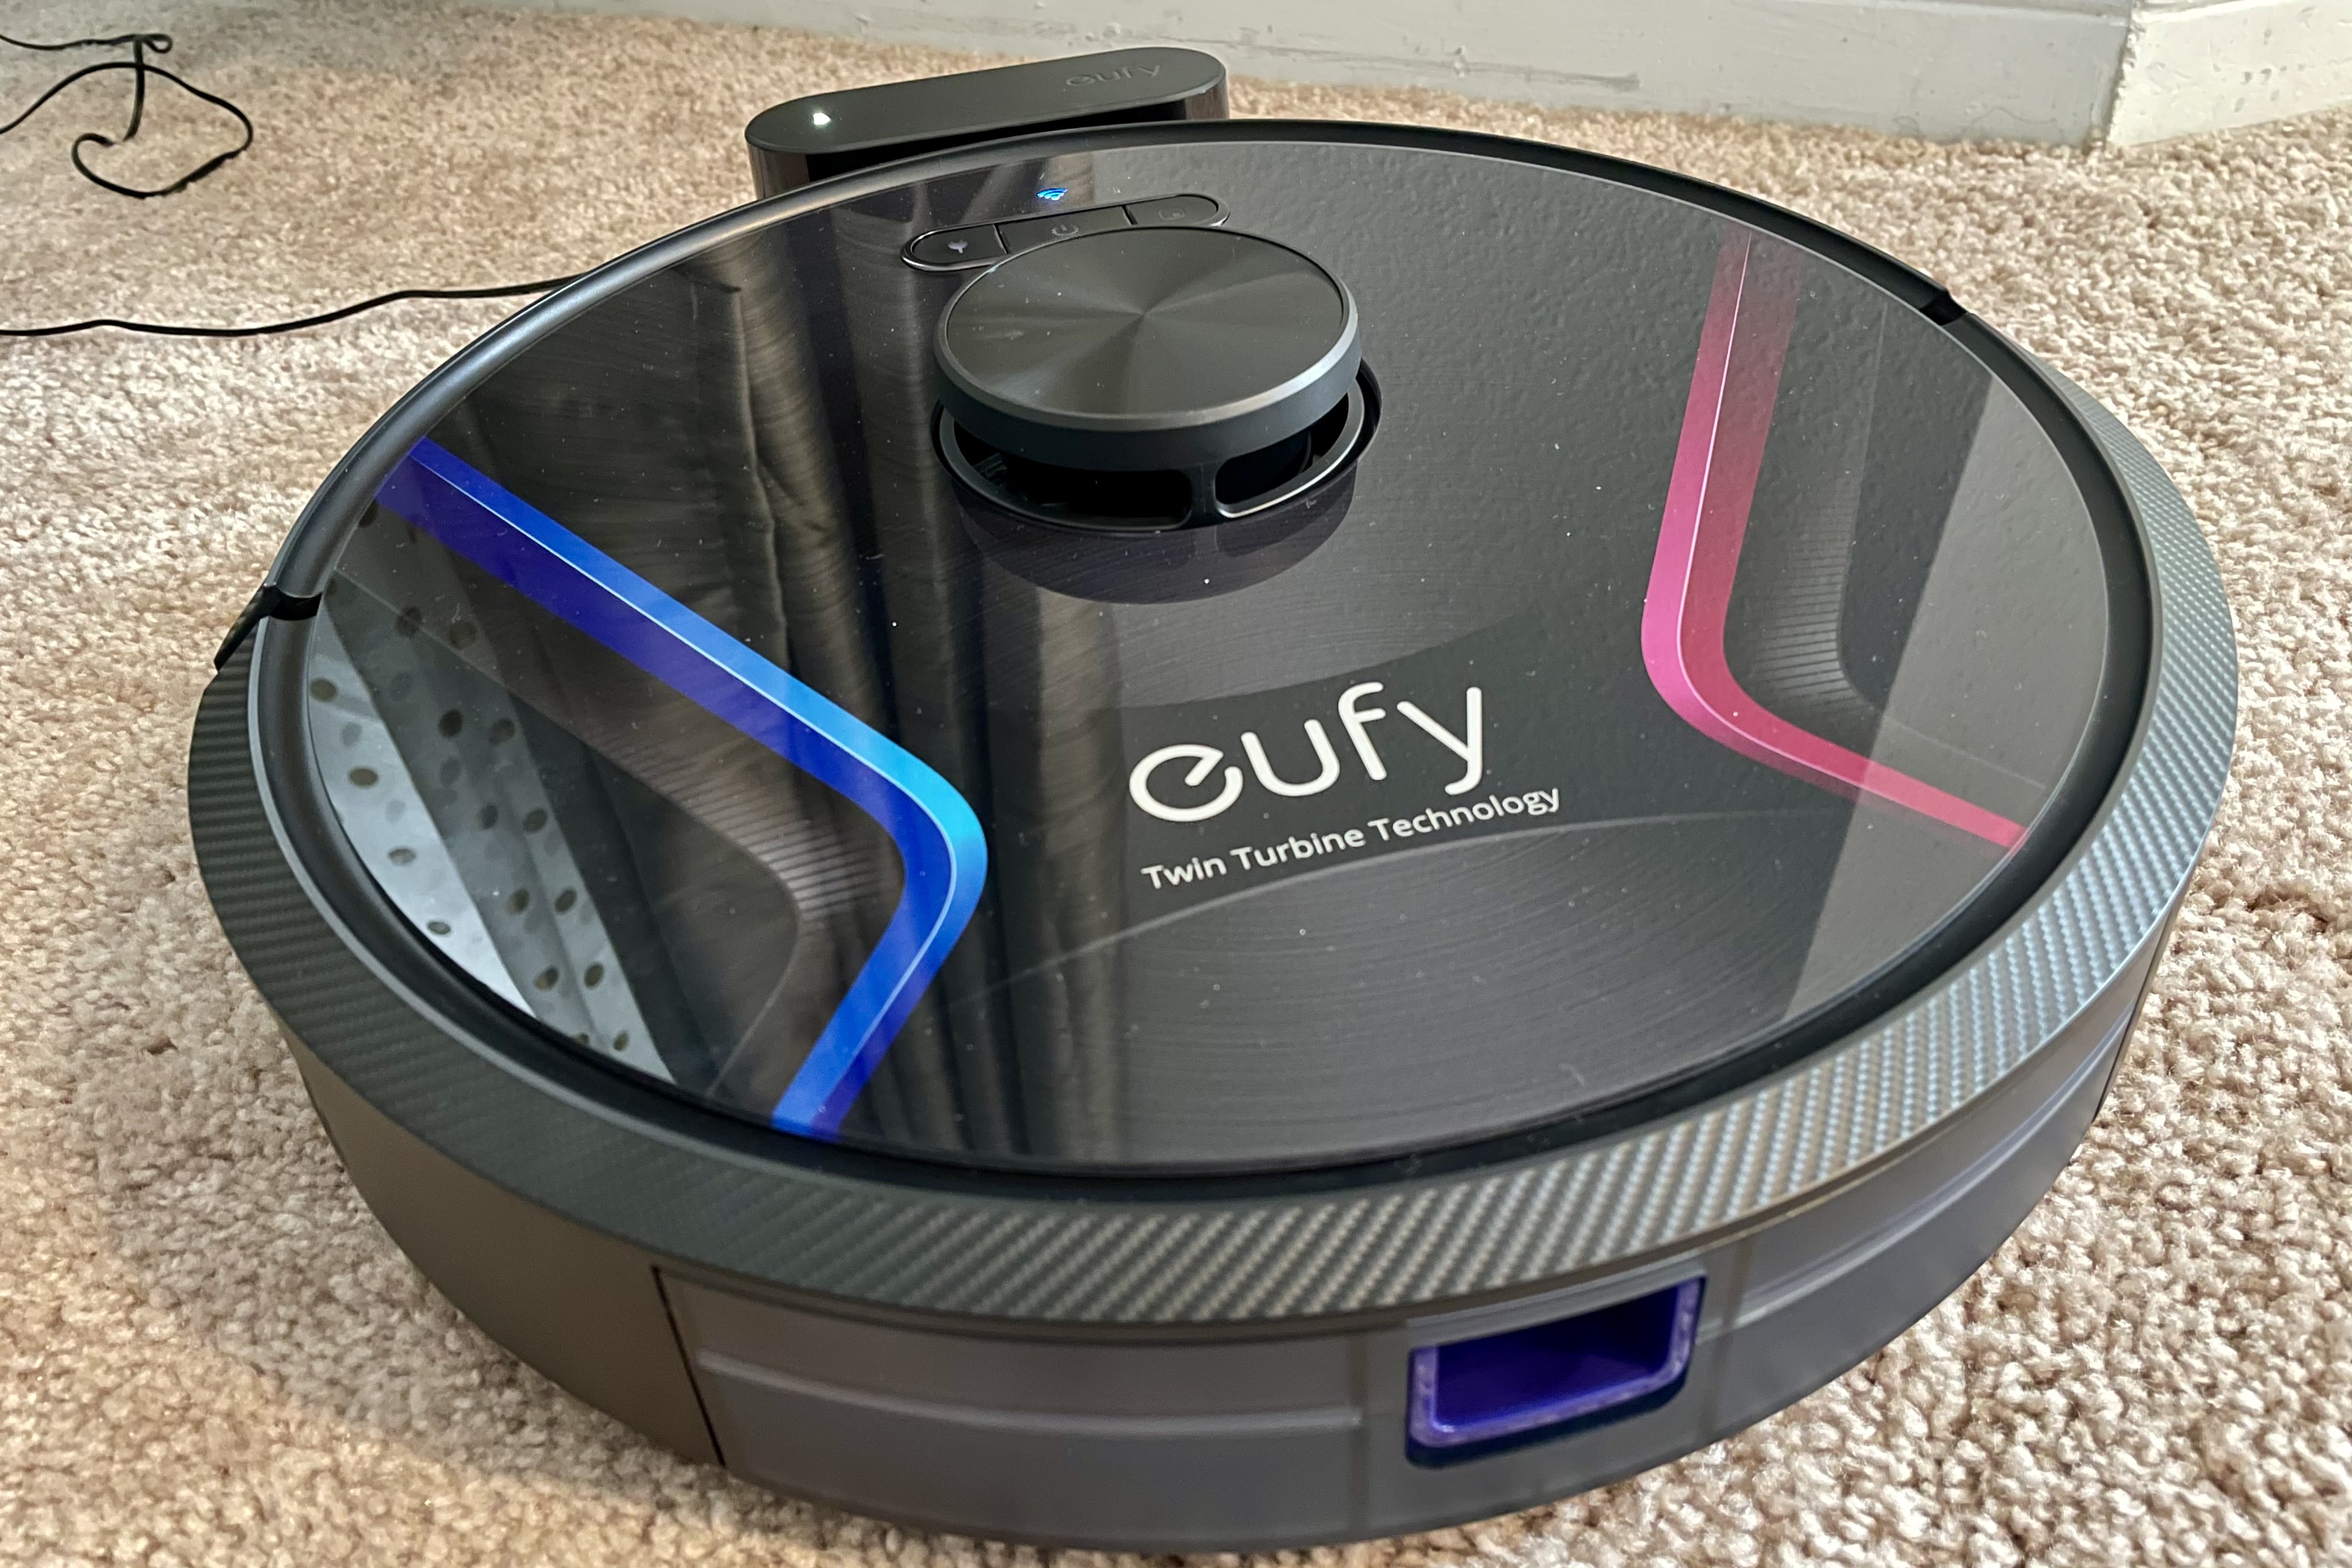 Eufy RoboVac X8 Review: Turbine Meets Unavoidable Collisions